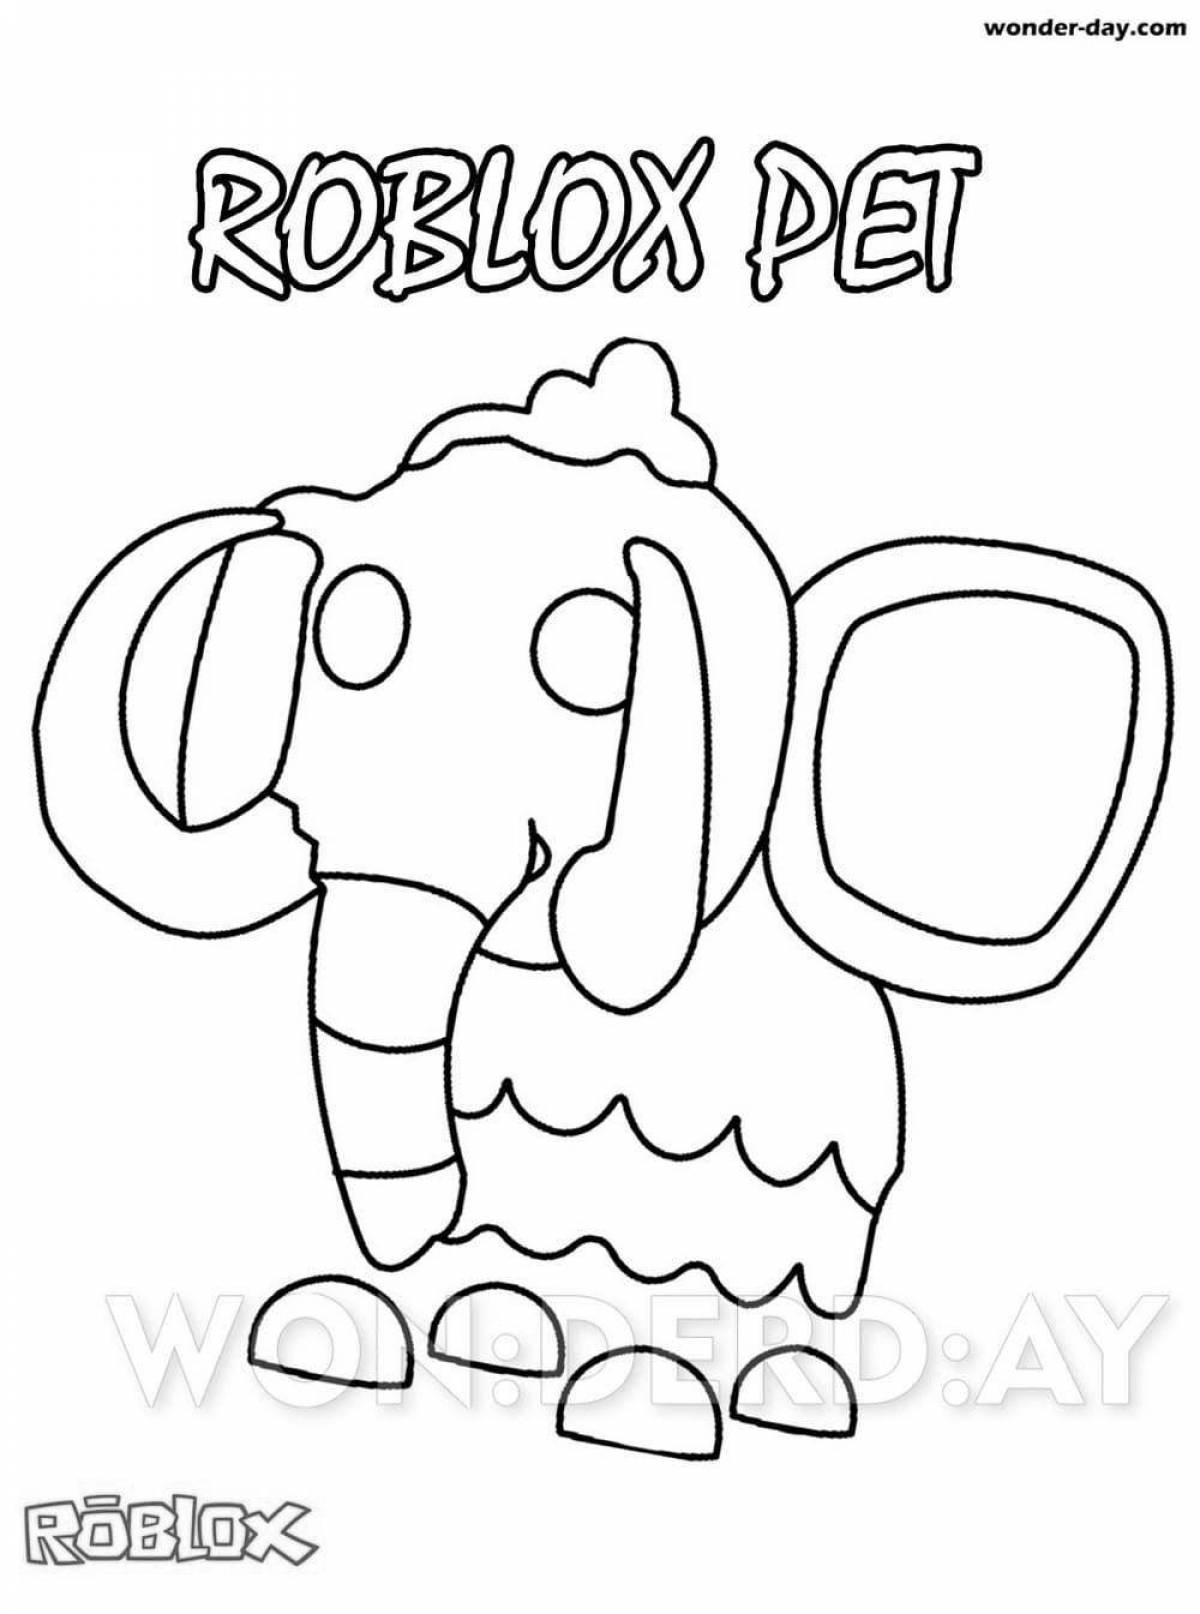 Coloring page playful miracle day